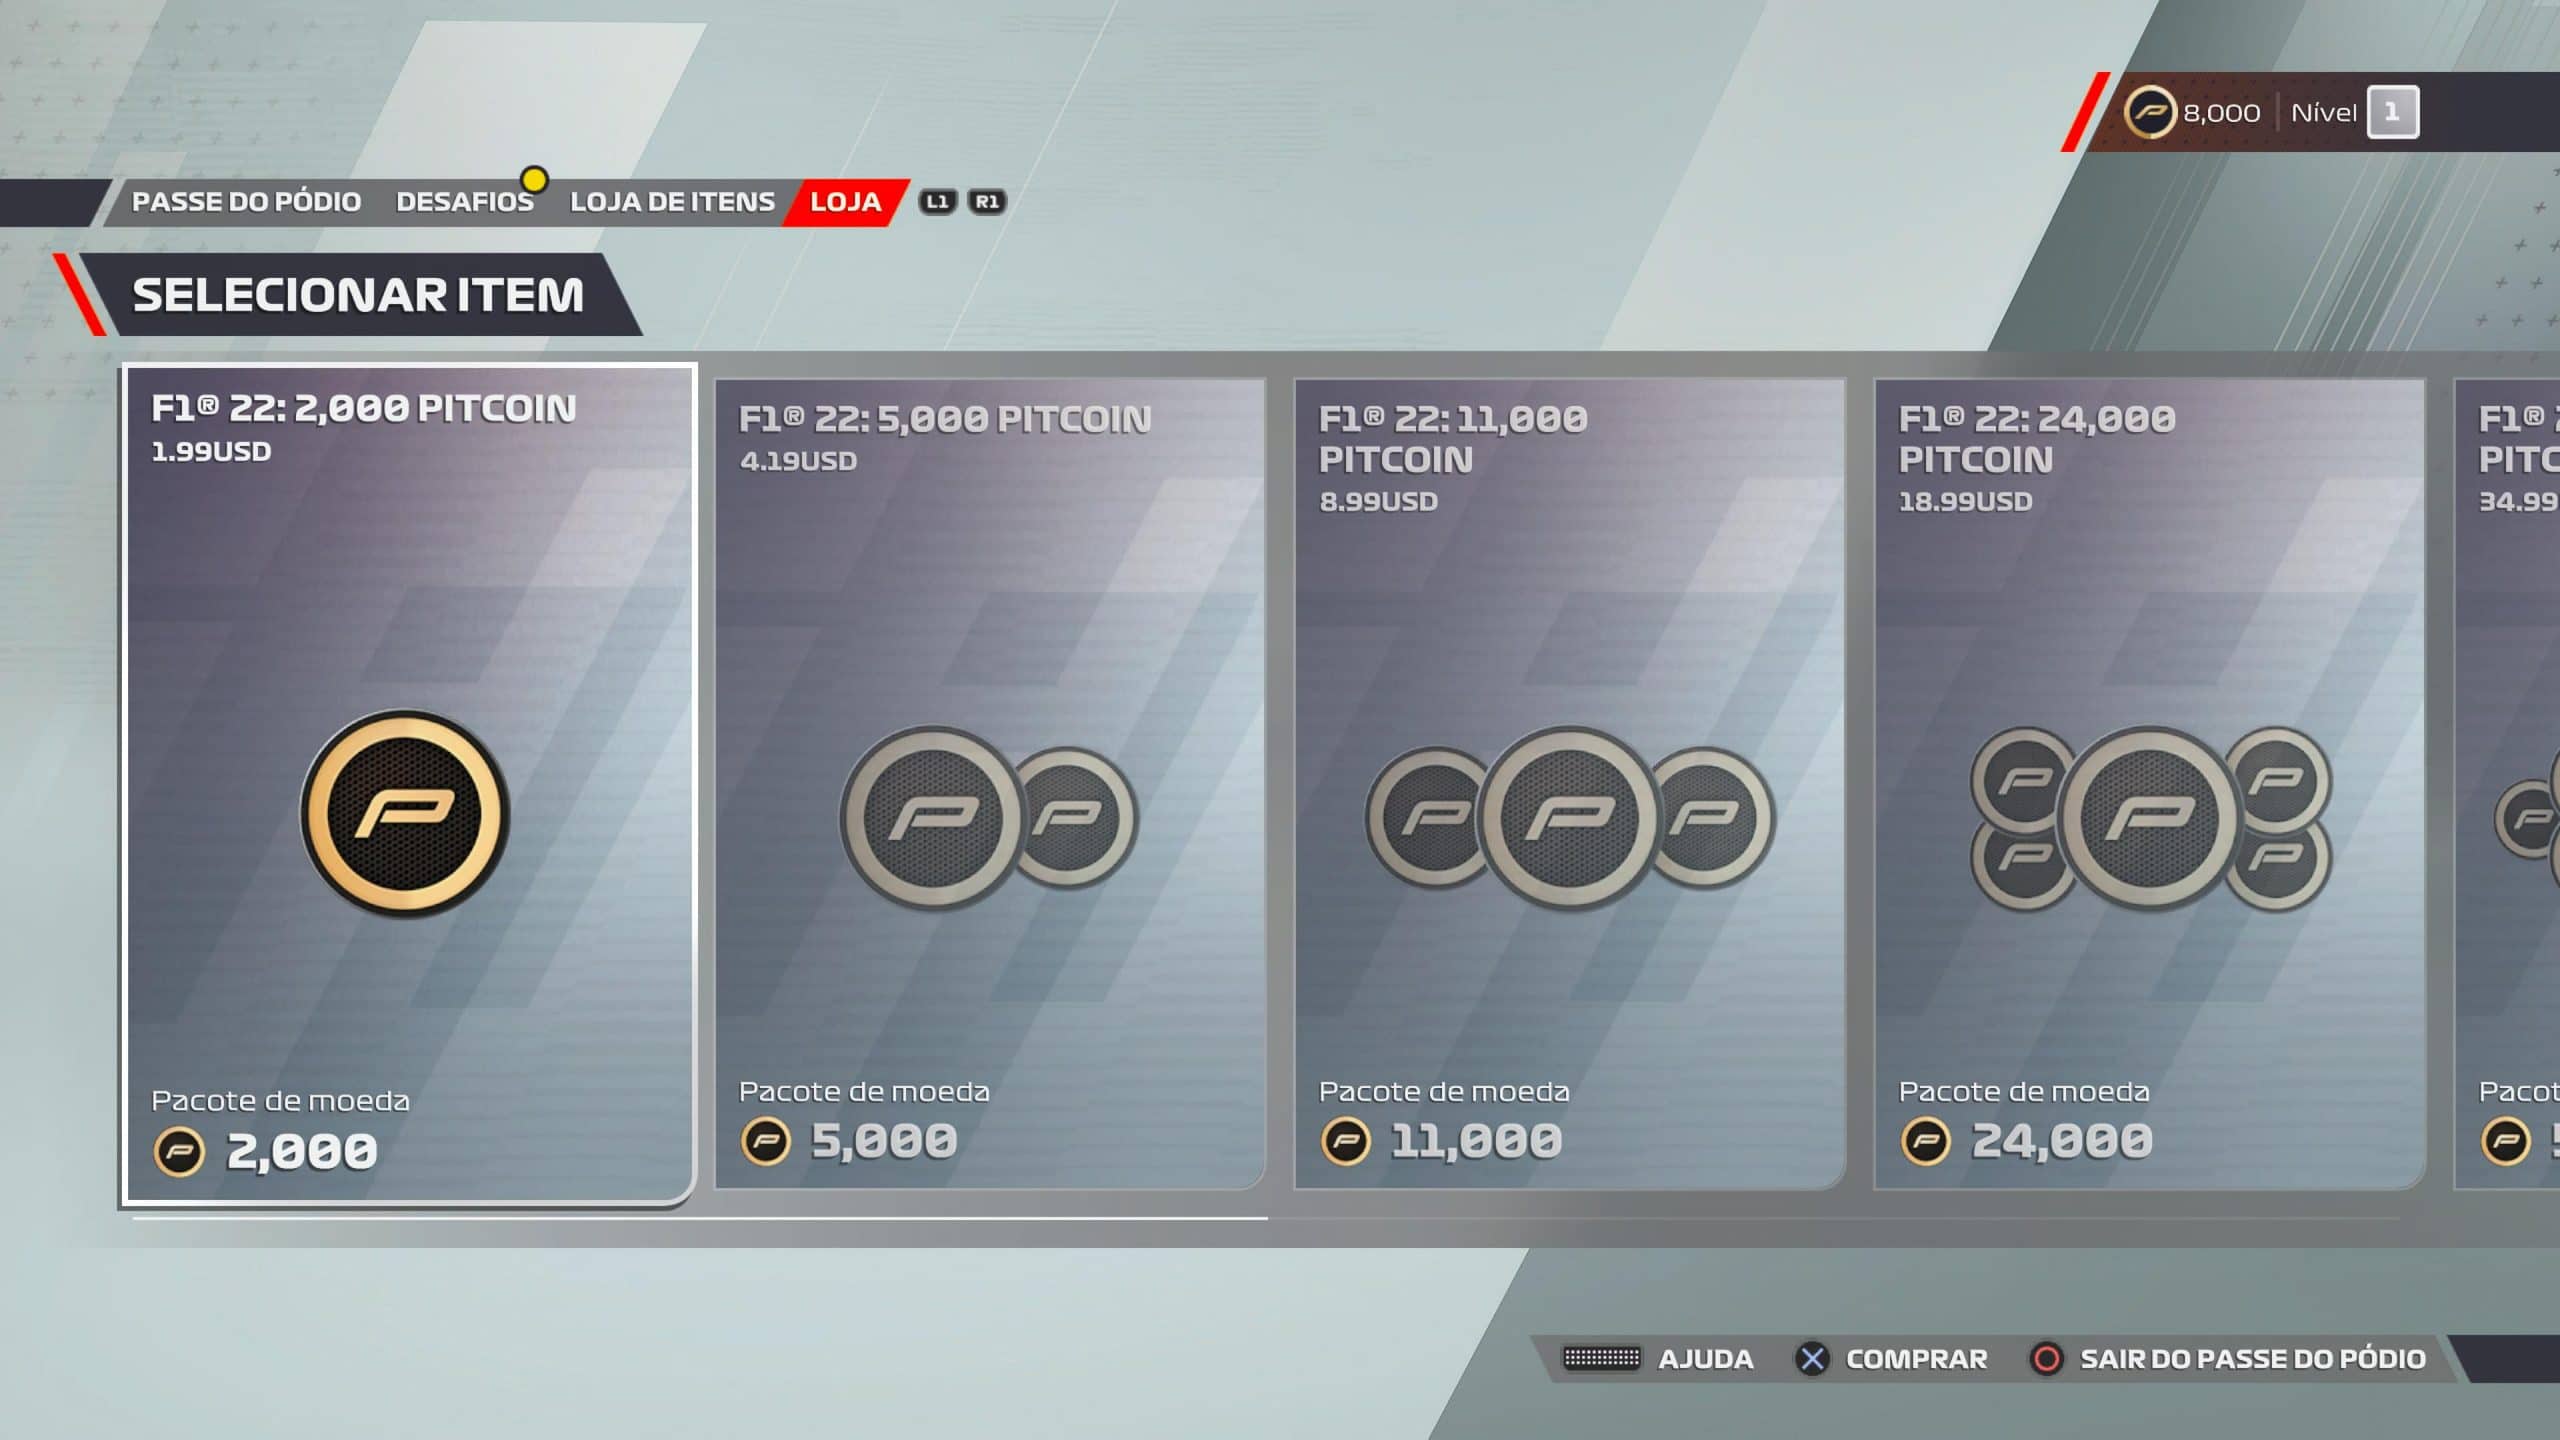 Famous microtransactions ... in F1 22!  (Photo: Reproduction / Thiago Barros)